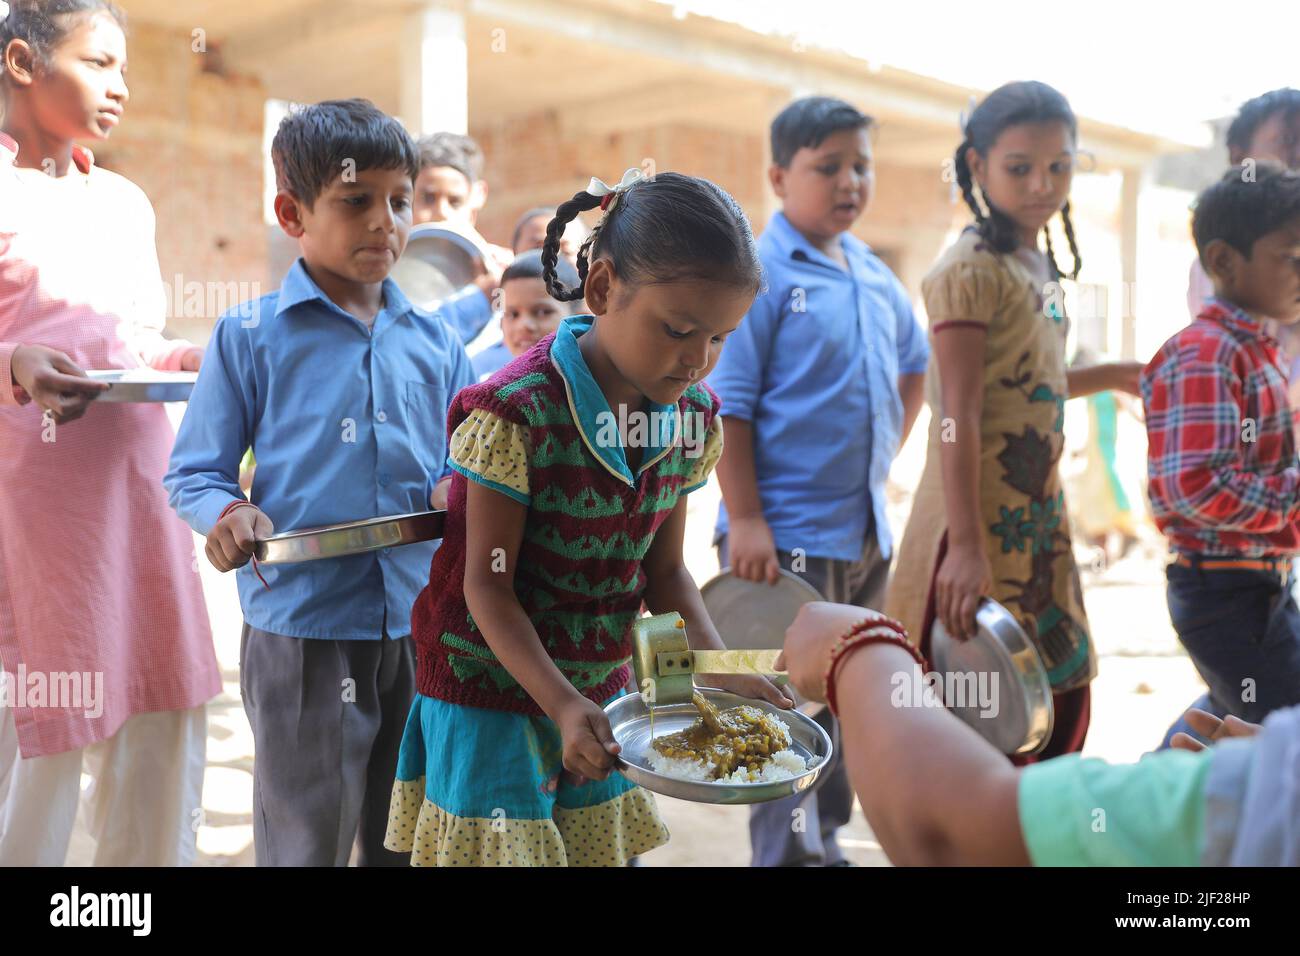 Children receive food served as part of The 'Mid Day Meal' scheme at A government school in rural area of Himachal Pradesh. Children engage in class activities at a government school in Baddi, a rural area in Himachal Pradesh. Stock Photo